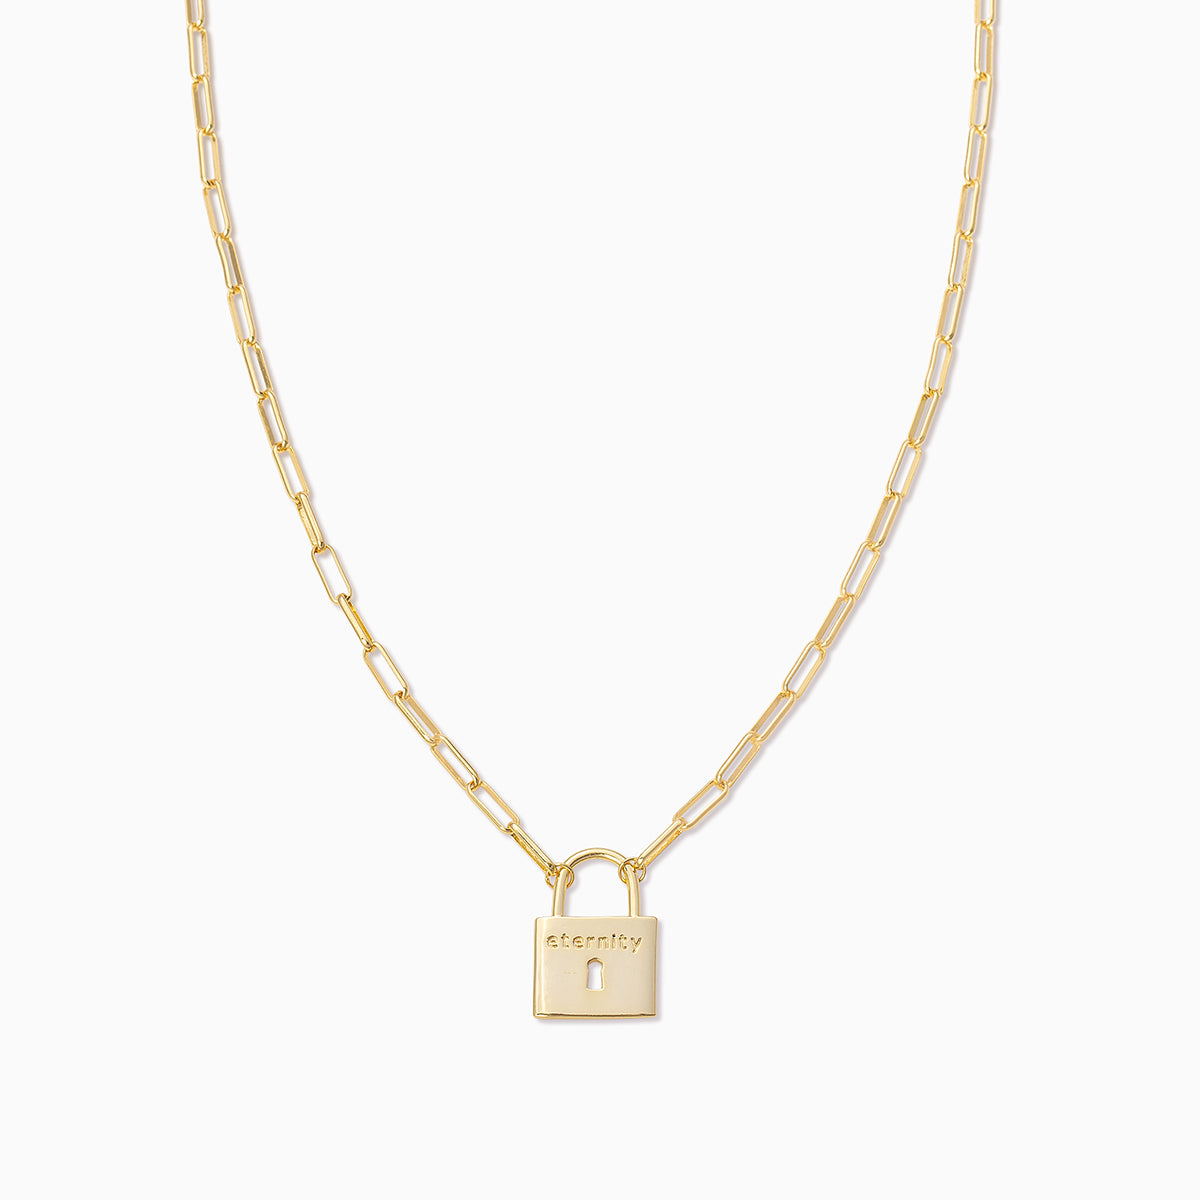 Eternity Lock Necklace | Gold | Product Image | Uncommon James